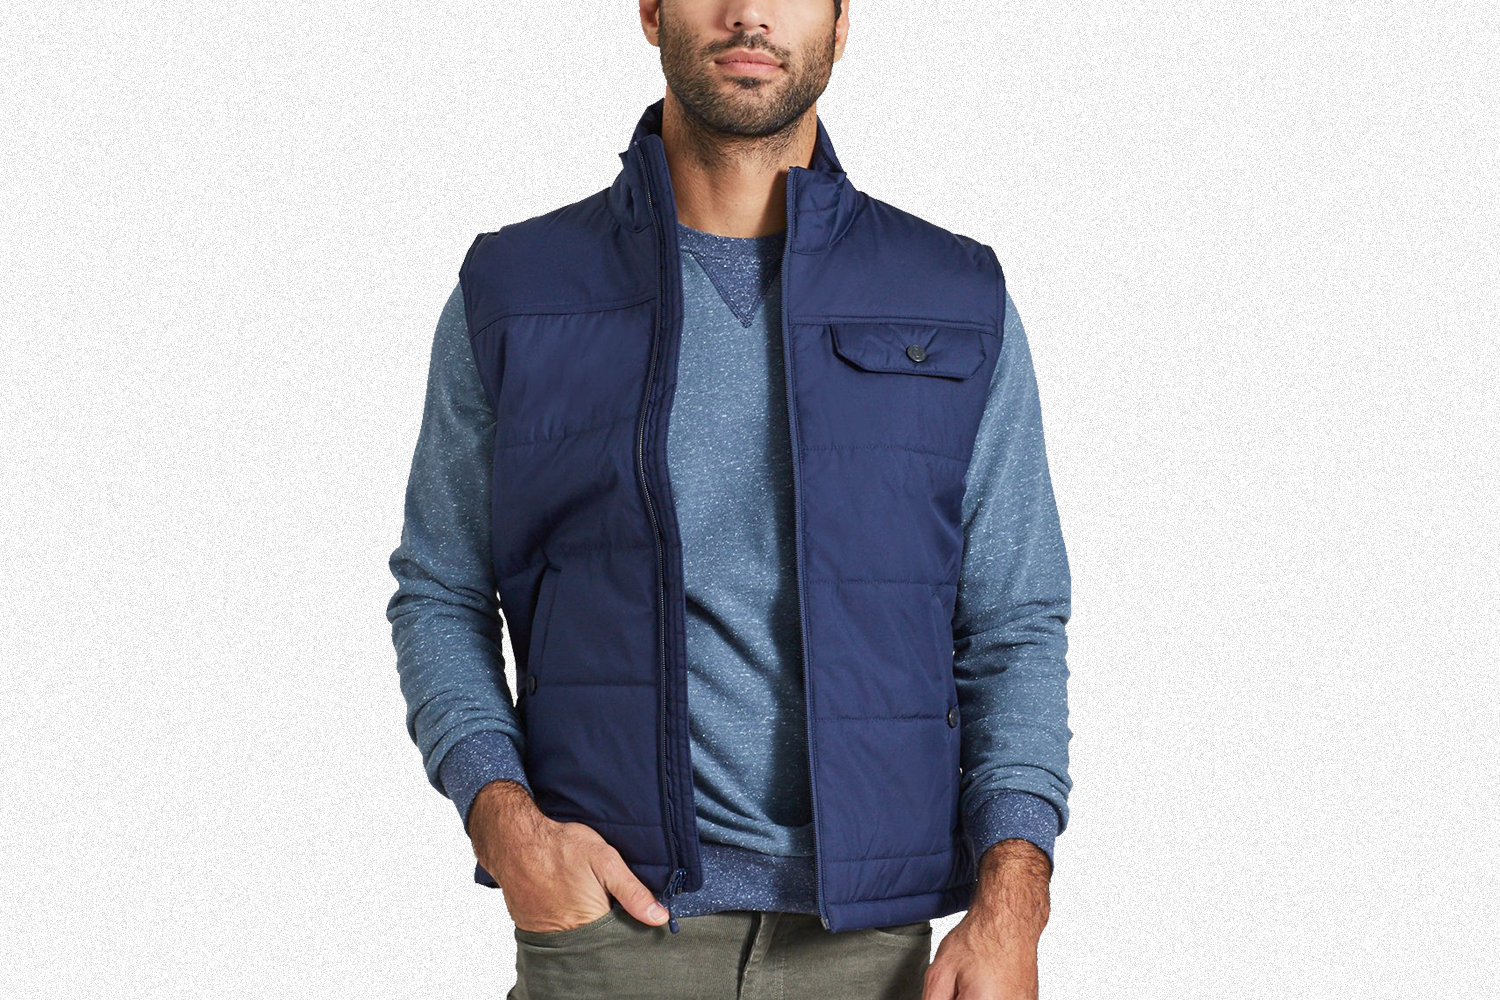 Bison Puffer Vest with BisonShield insulation from United by Blue